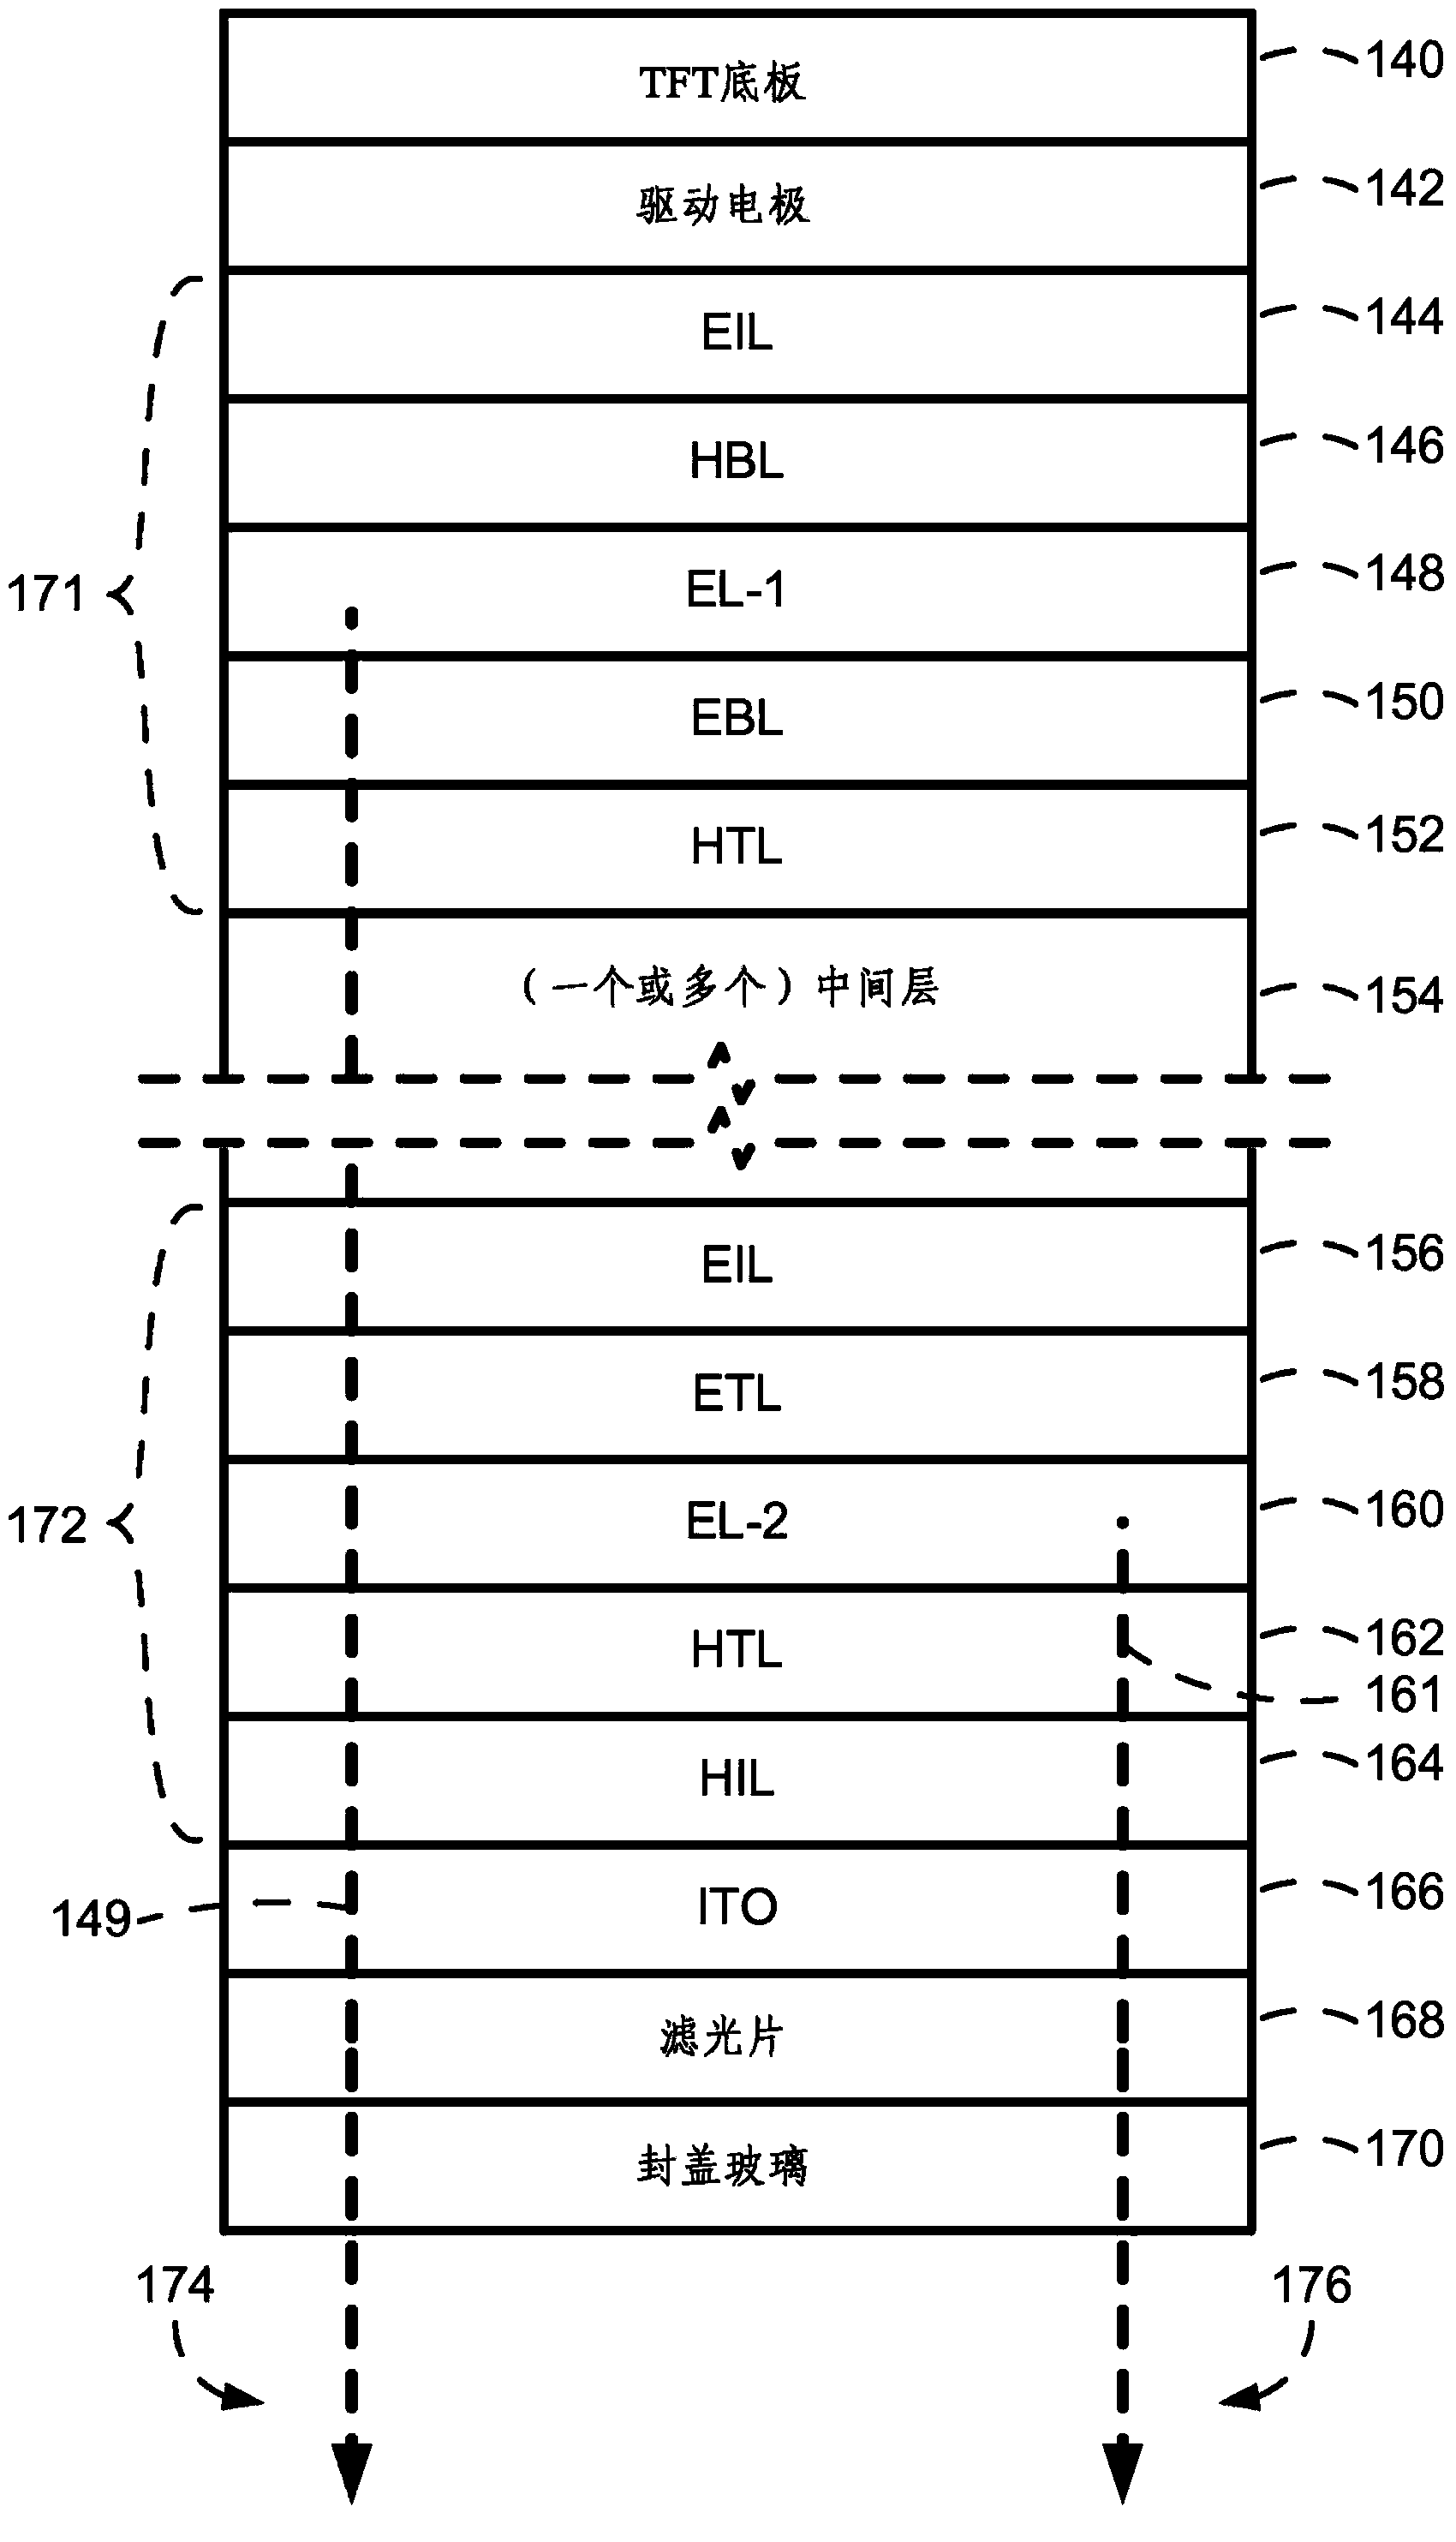 High resolution display architecture